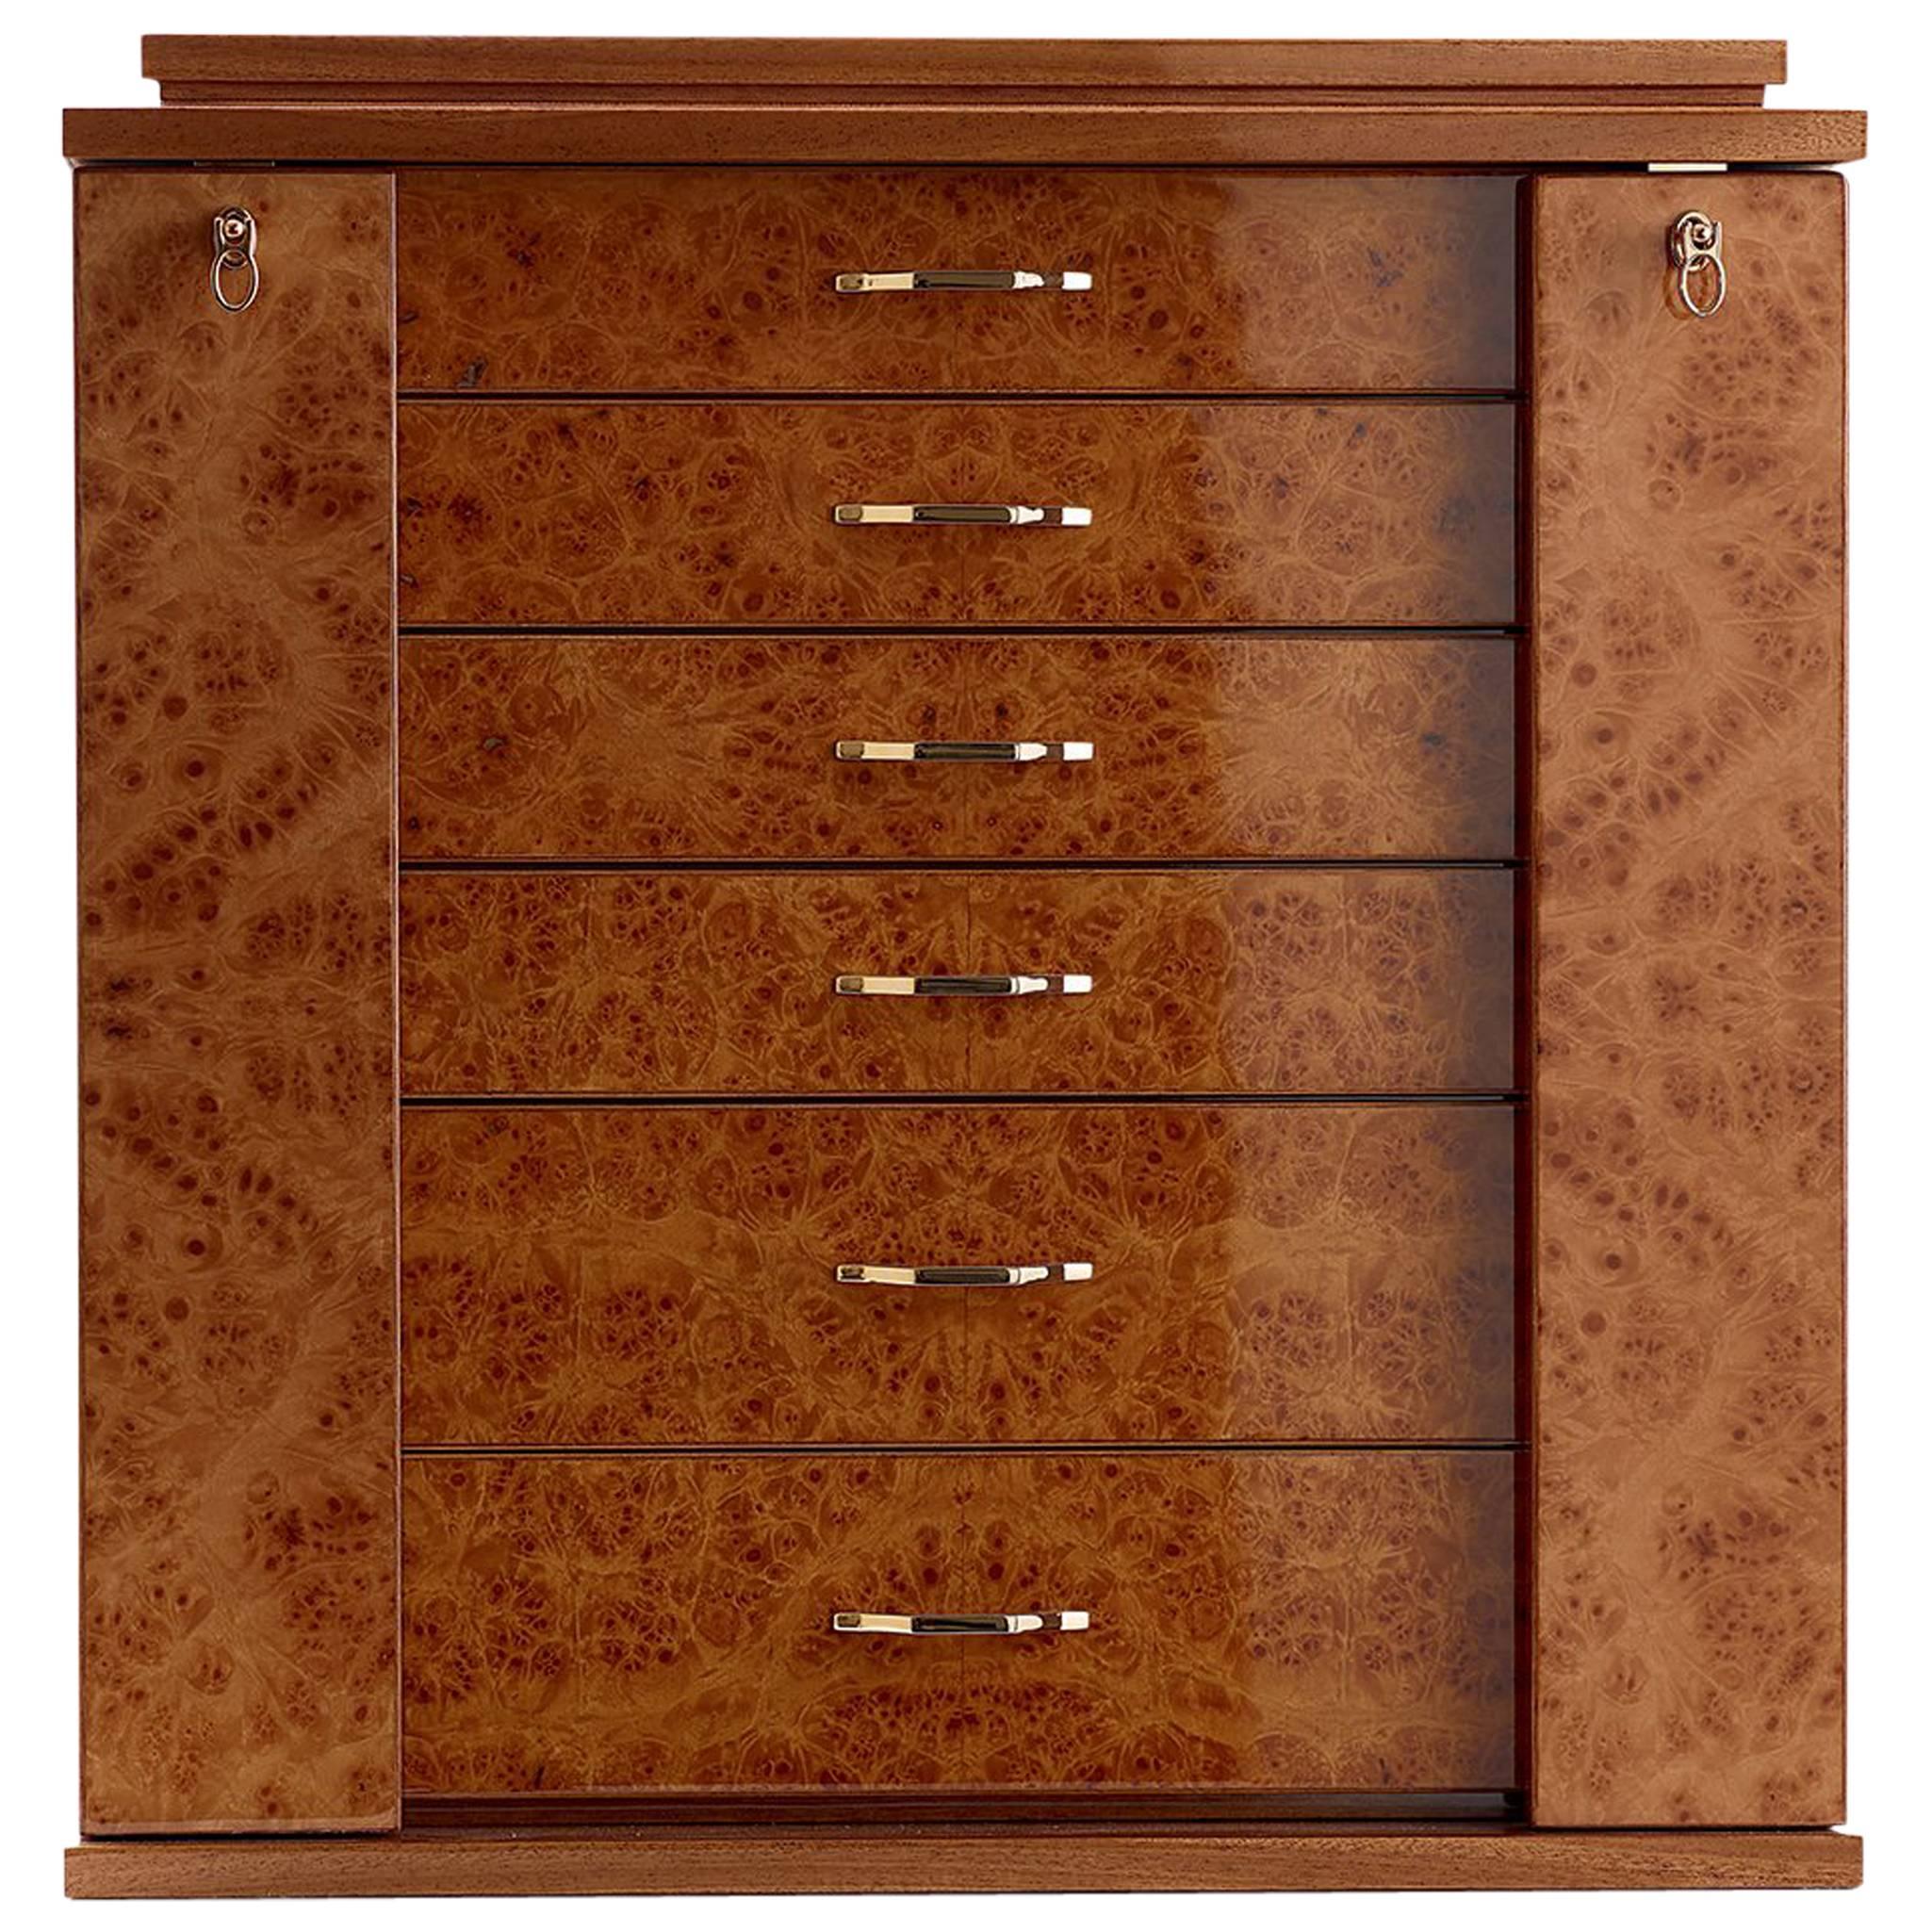 Polished Briarwood and Mahogany Jewel Box with Gold-Plated Hardware by Agresti